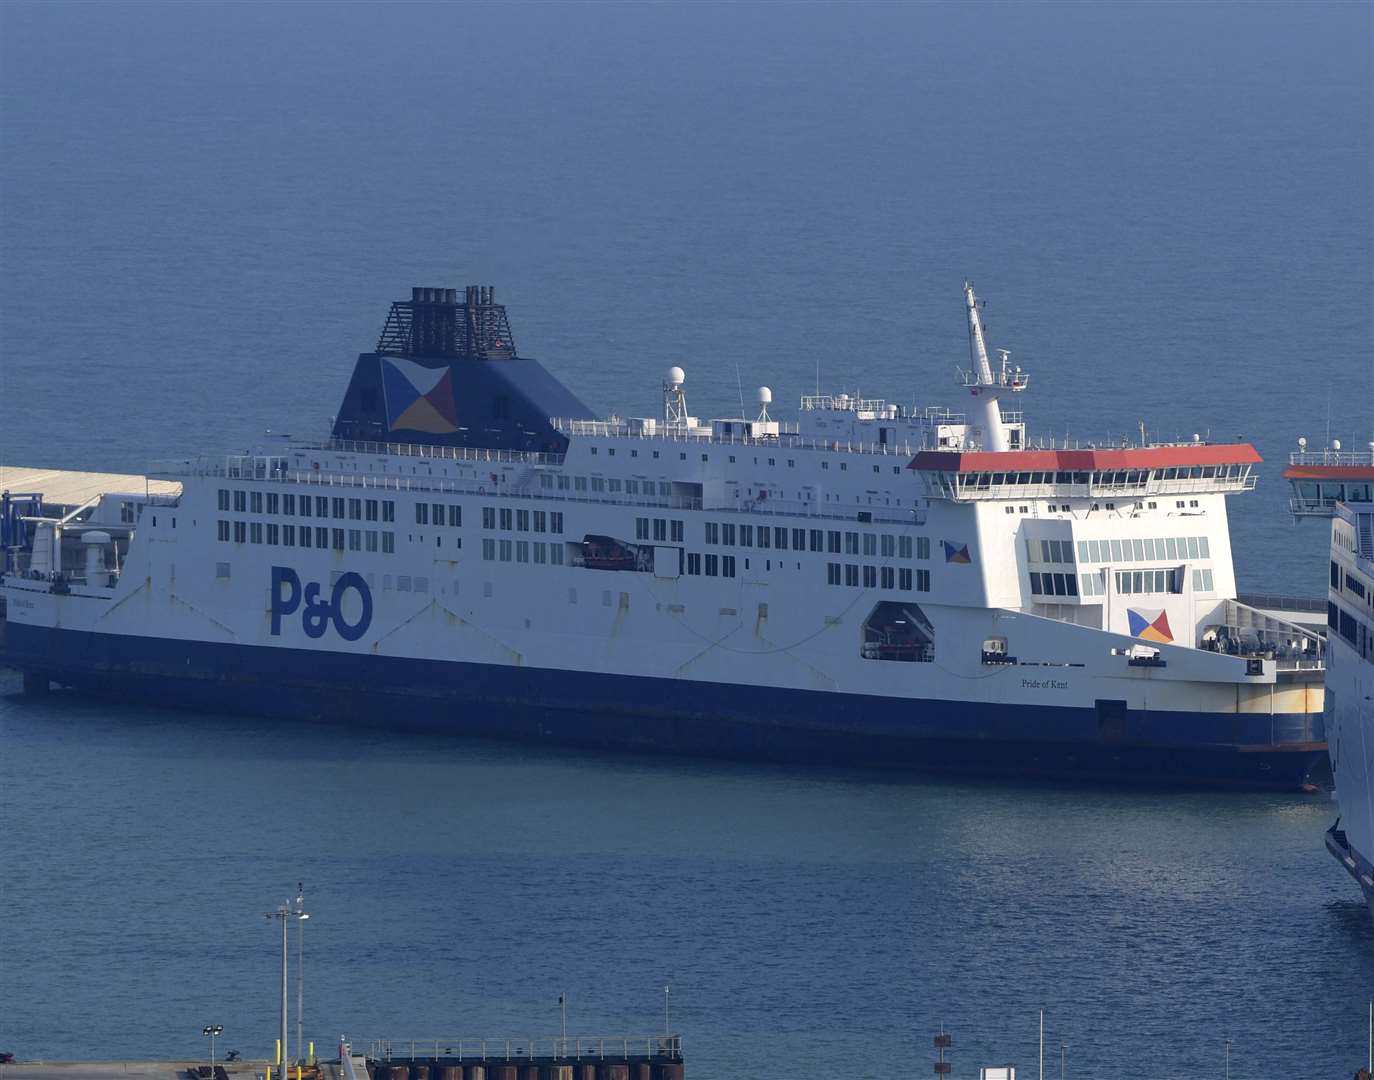 Pride of Kent has set sail again from Dover. Picture: Barry Goodwin